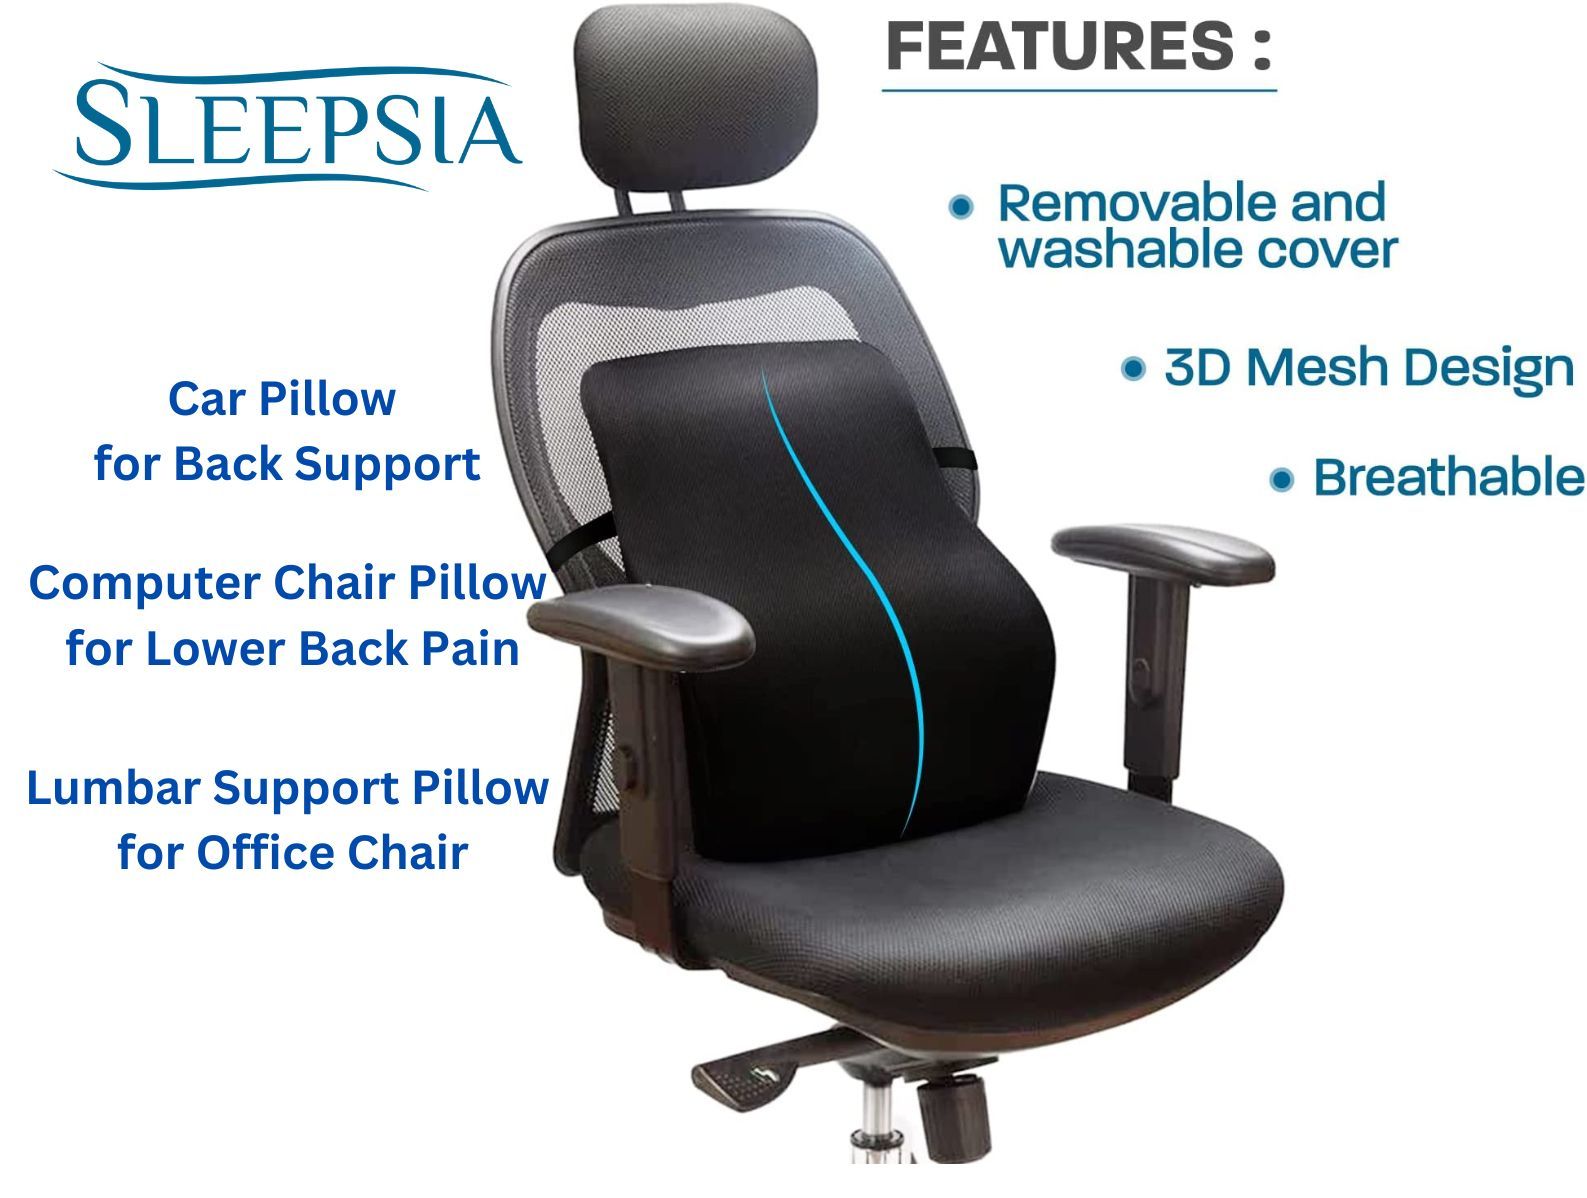 Is It Good To Have Lumbar Support For Office Chair?